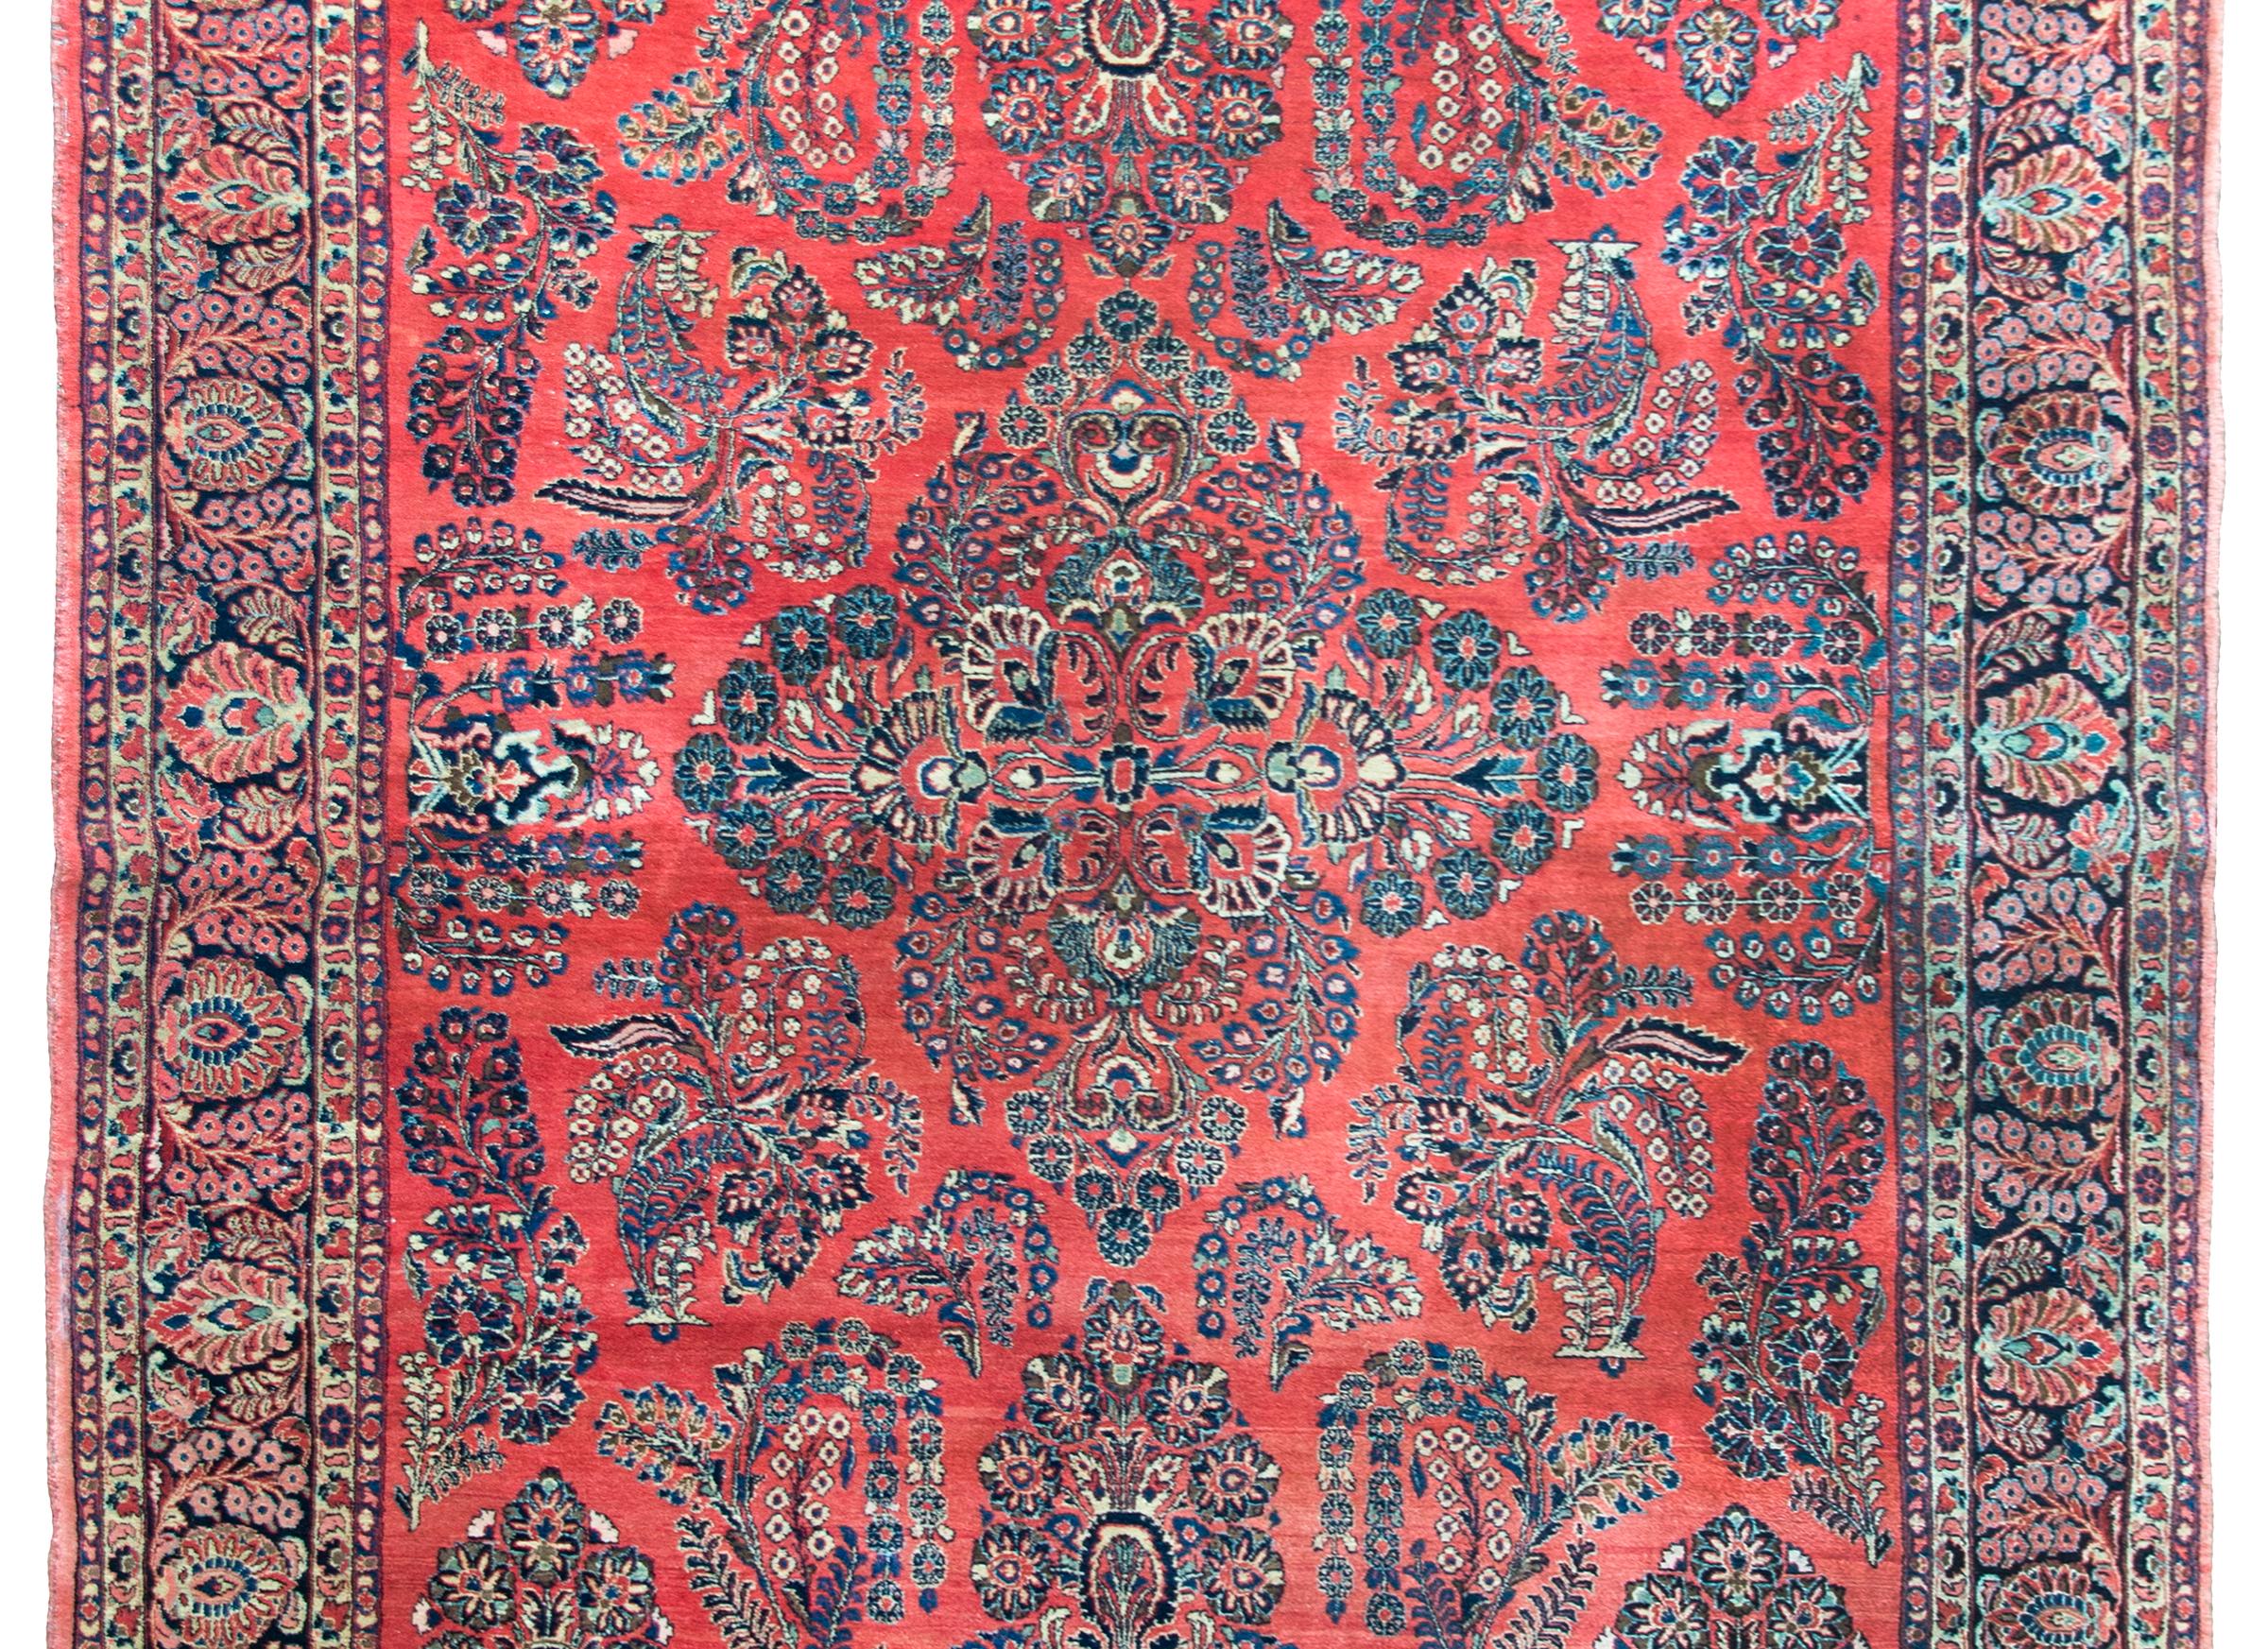 A beautiful early 20th century Persian Sarouk rug with an all-over mirrored floral cluster pattern with myriad flowers and woven in traditional Sarouk colors of light and dark indigo, cream, brown, pink, and all set against a crimson background. 